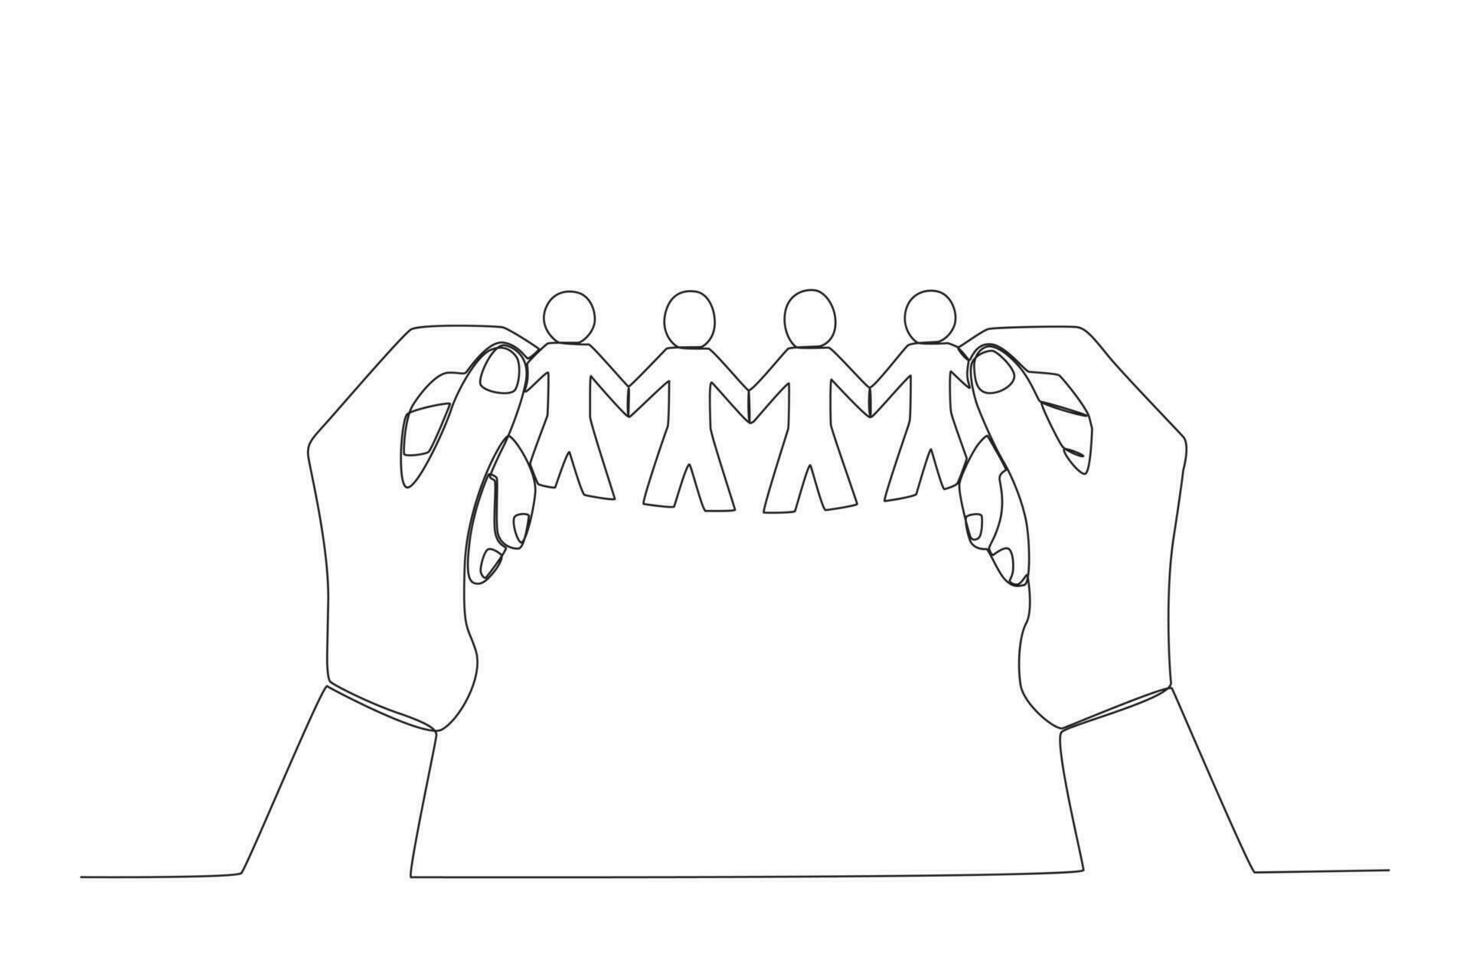 Hand-holding human-shaped figure vector